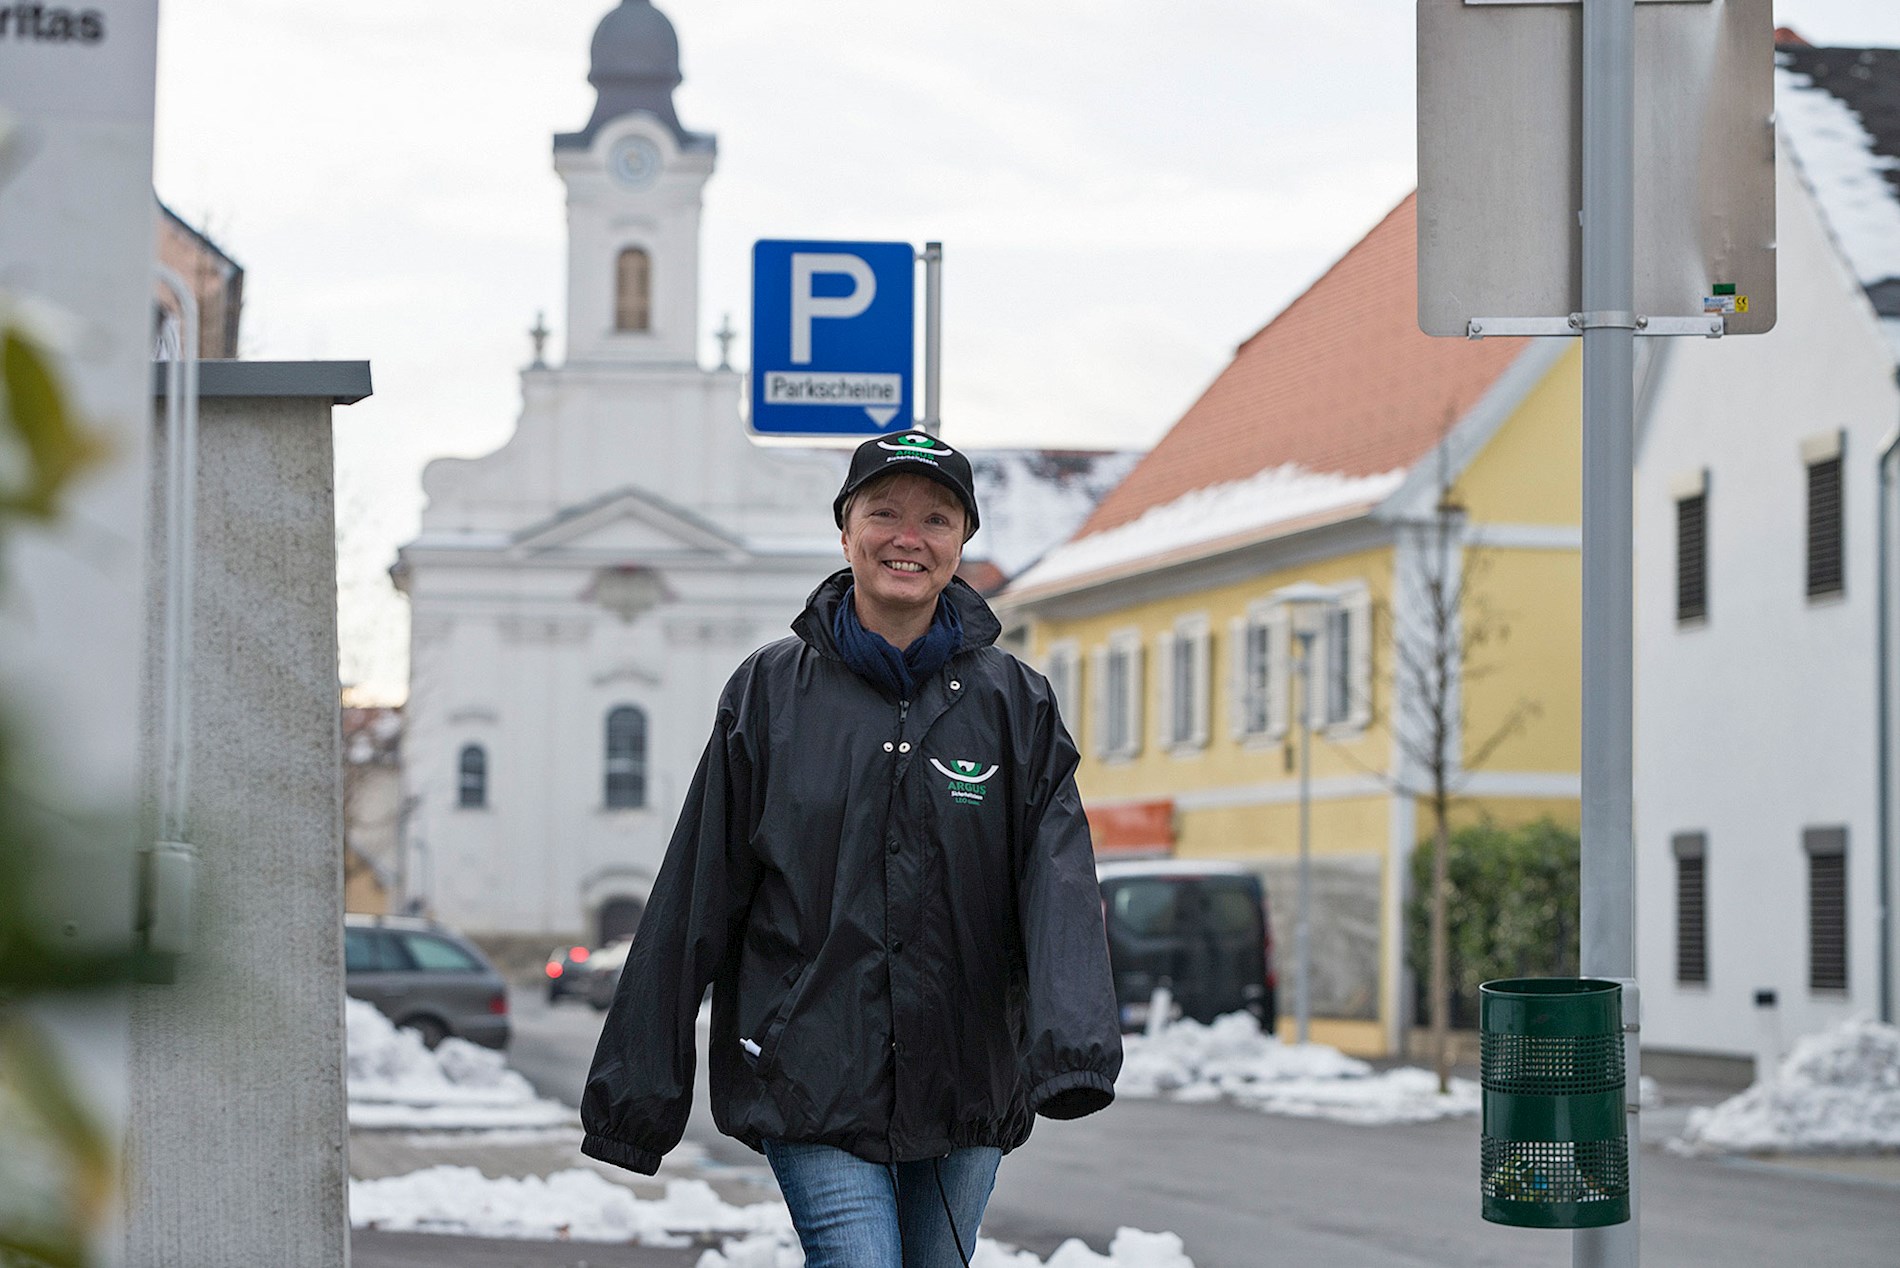 A woman is wearing a black rain jacket and a black hat with the logo of ARGUS. She is smiling and walking down a street towards us.